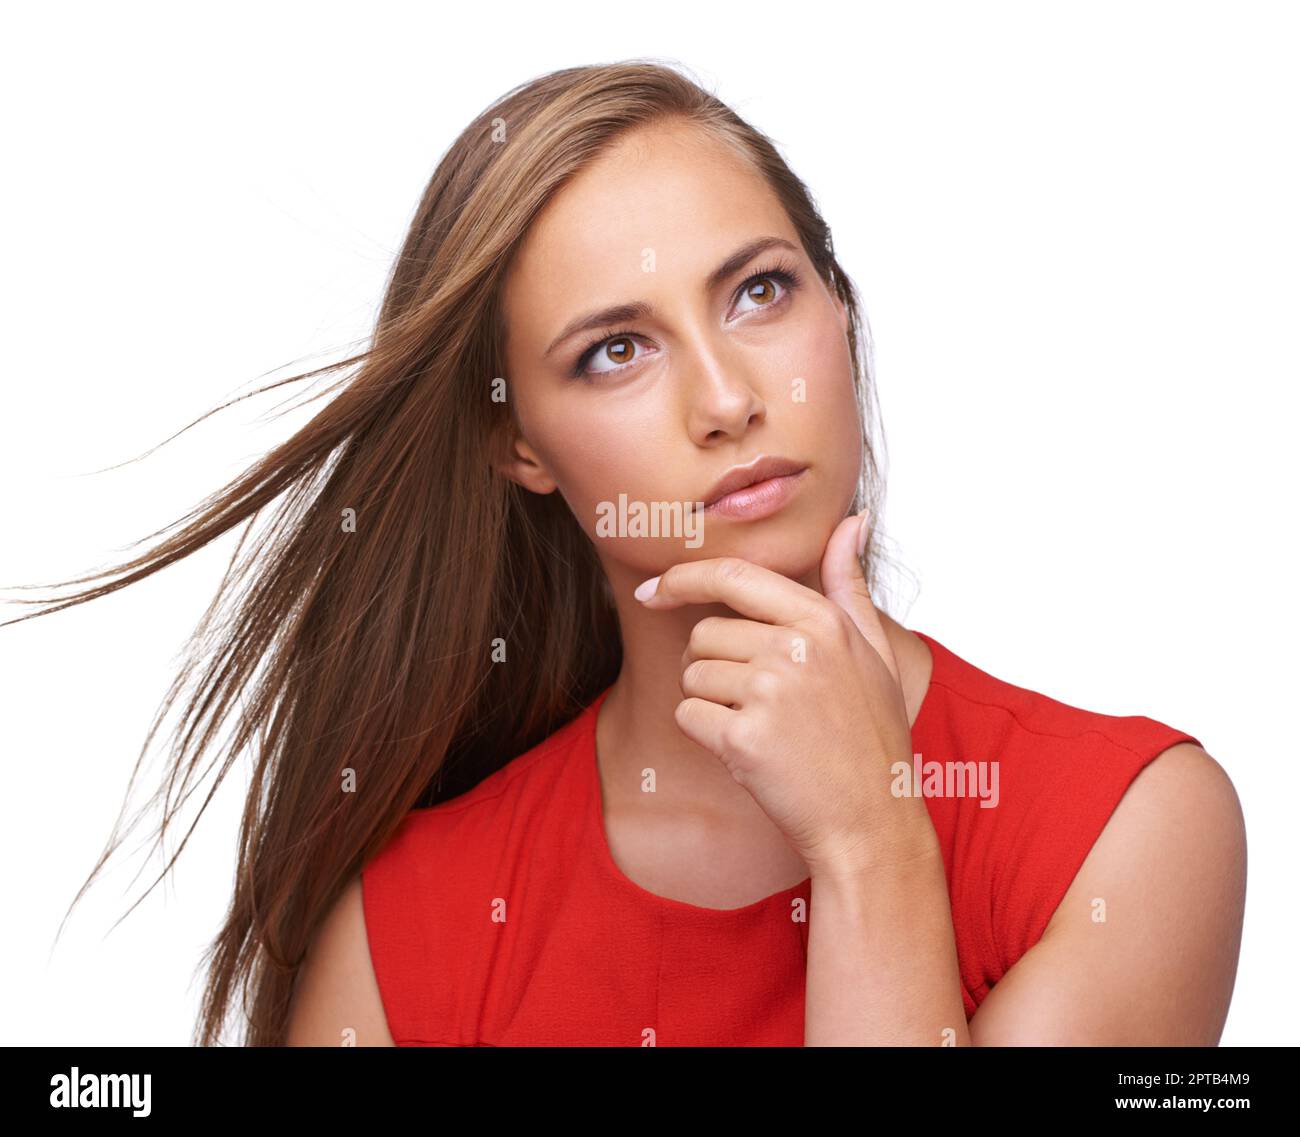 Cute girl deep in thought looking away, isolated on white background Stock  Photo - Alamy